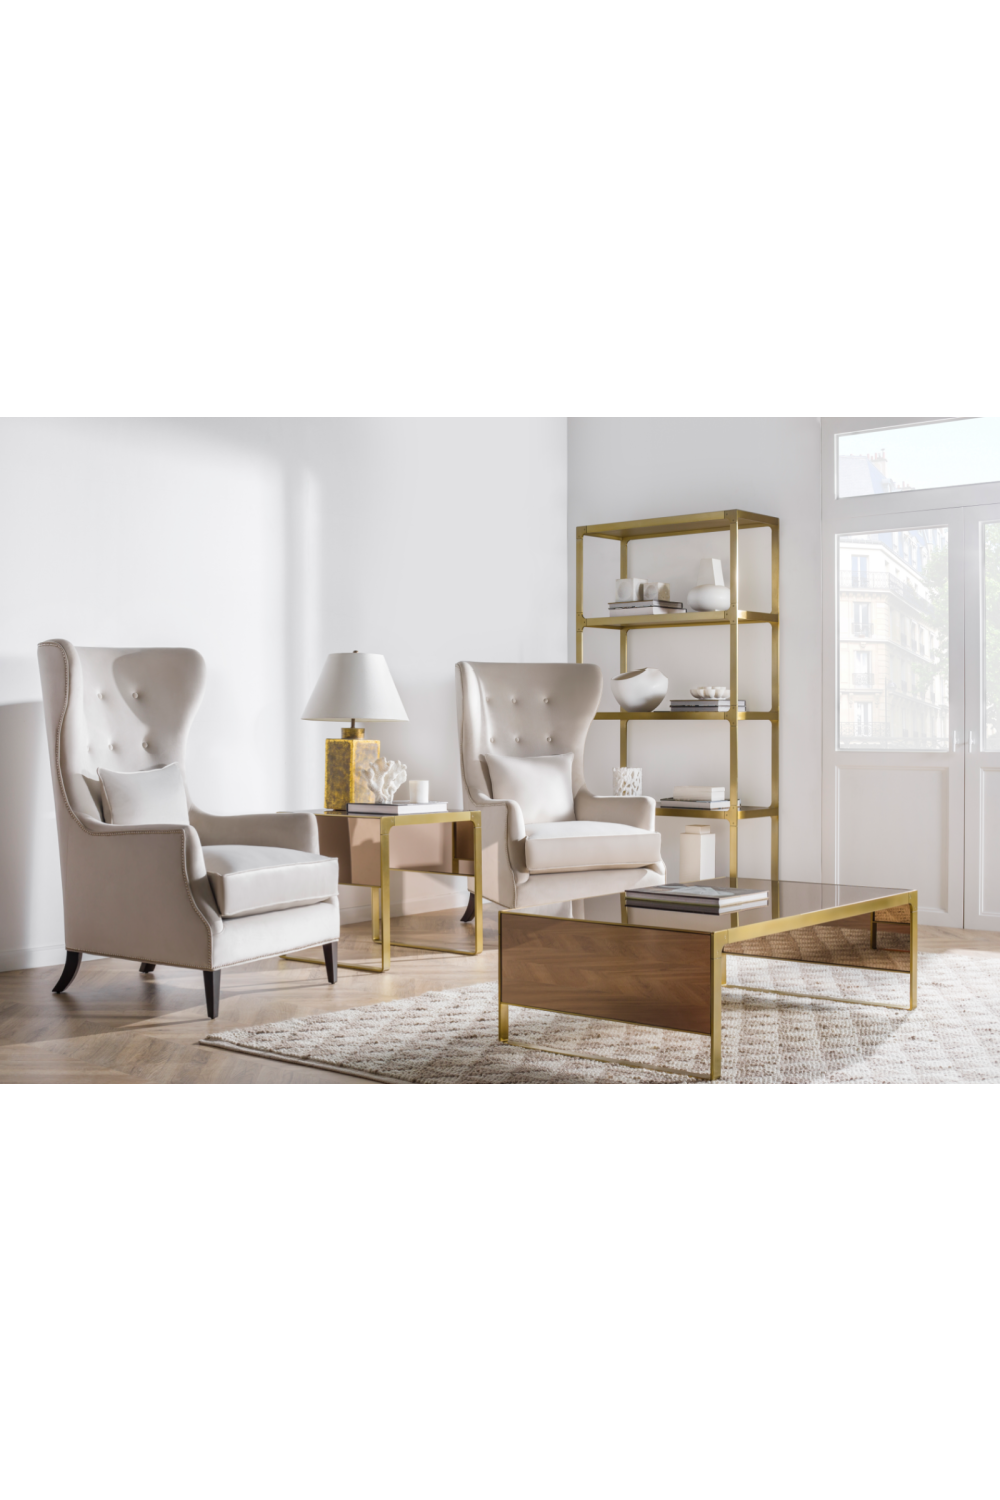 Beige Upholstery Tufted Accent Chair | Andrew Martin Justin | OROA.com